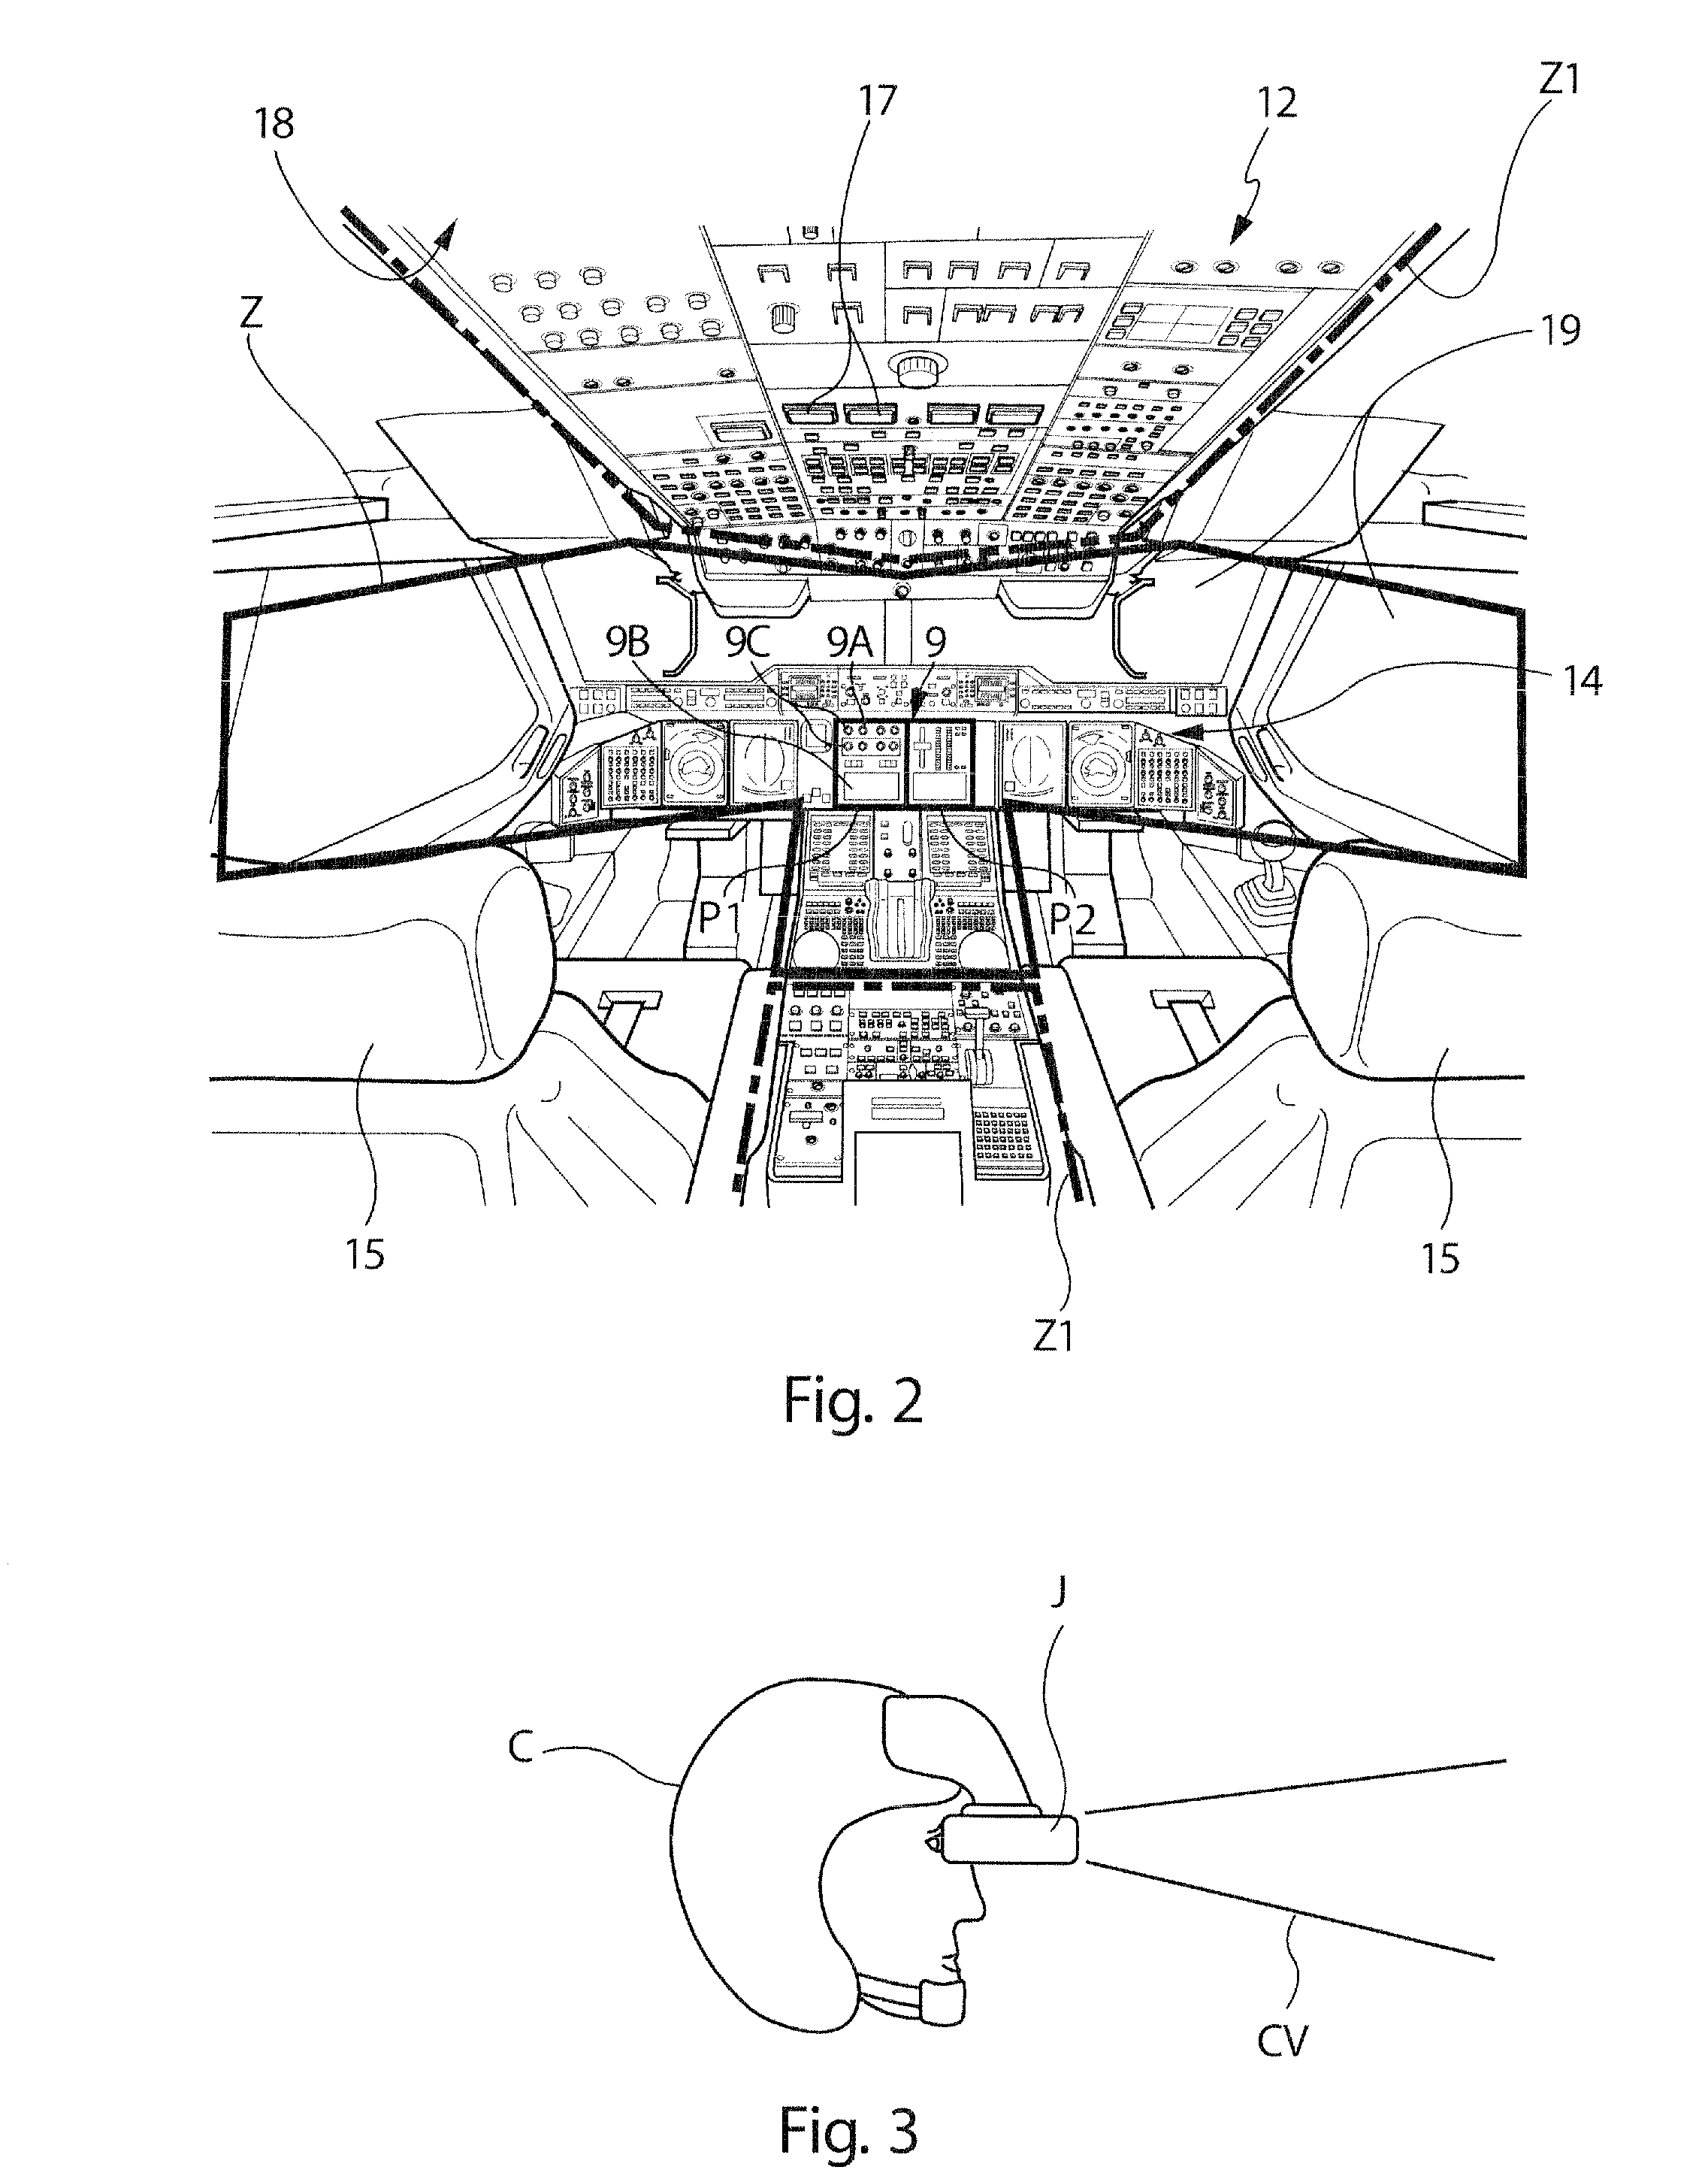 Installation for detecting and displaying the failures of the functional systems of an aircraft